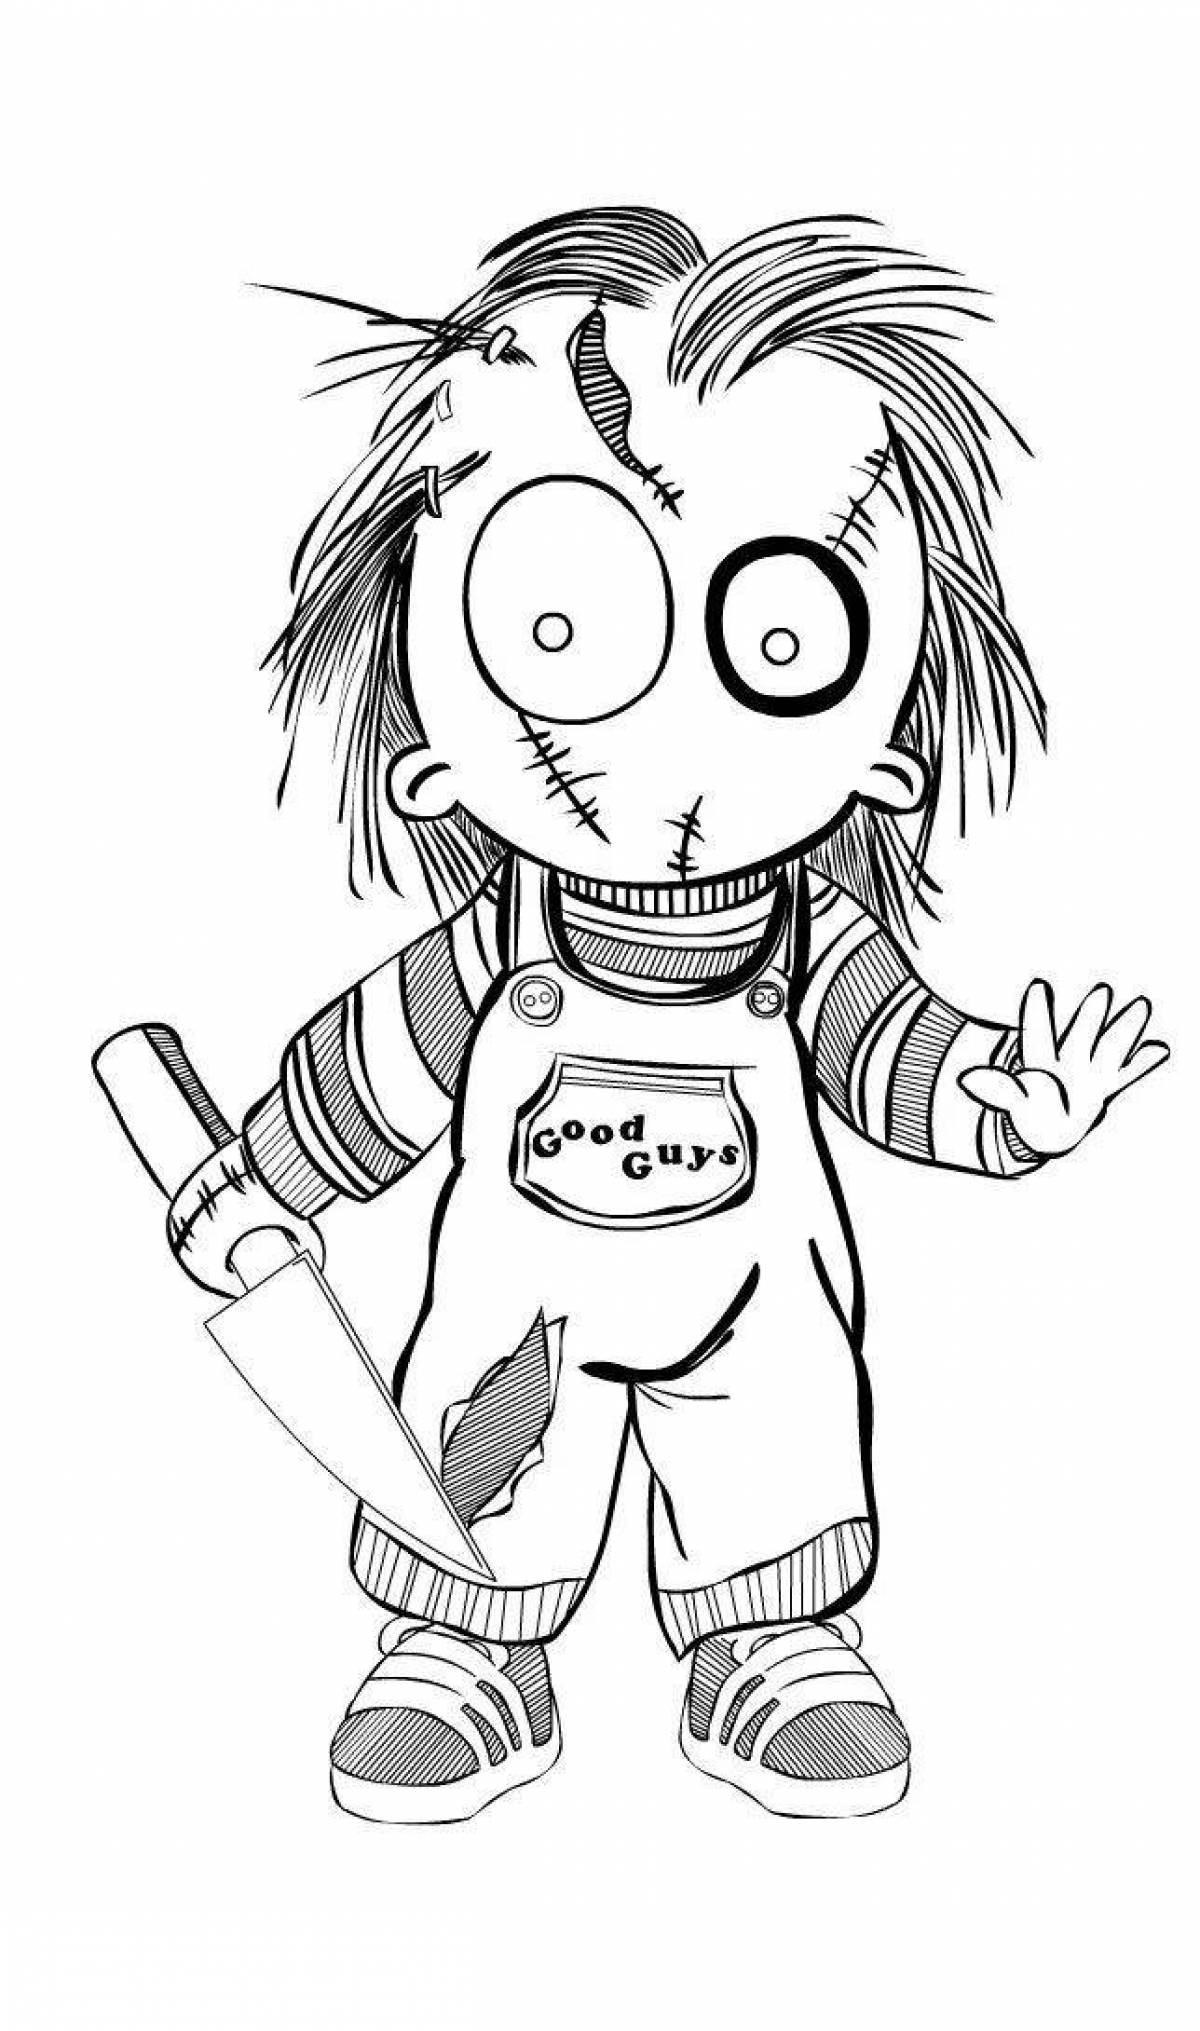 Chucky sparkly doll coloring page